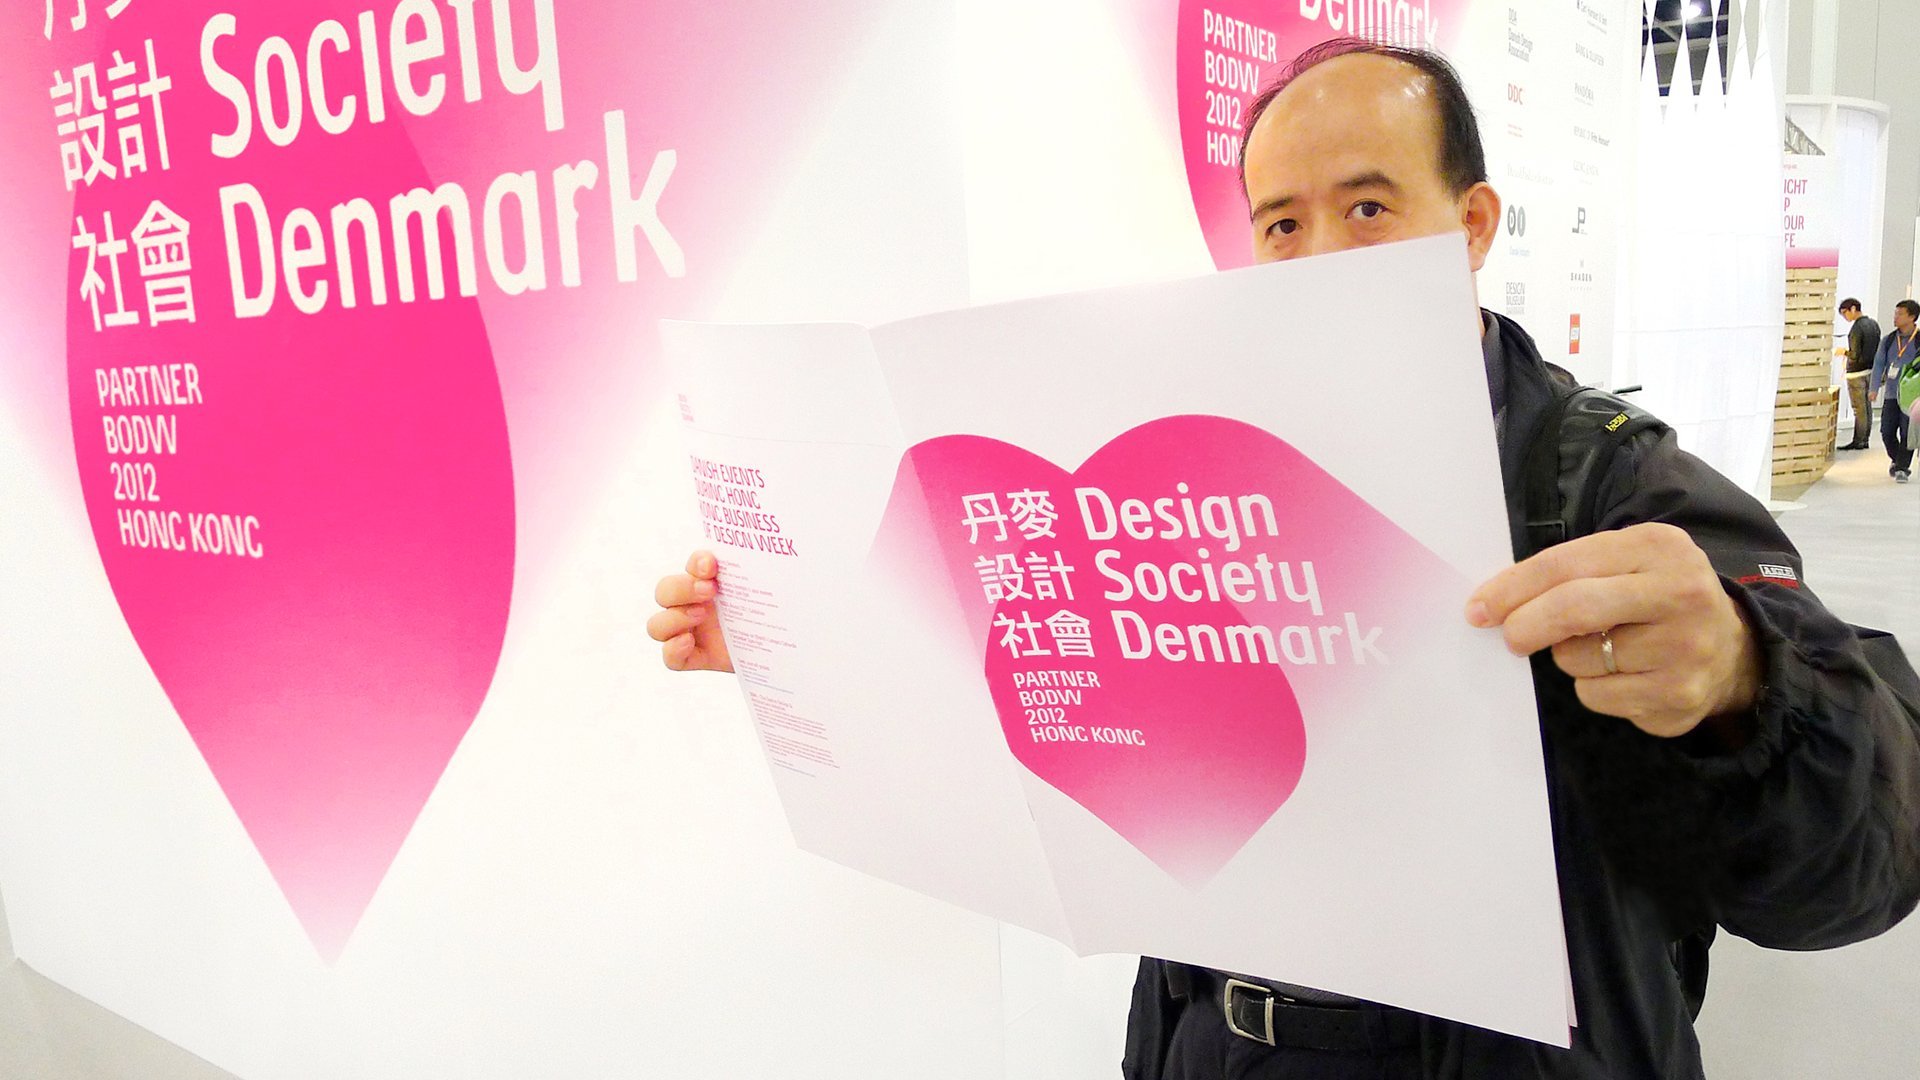 Image of visitor showcasing a Design Society Denmark catalogue by LOOP Associates at event.